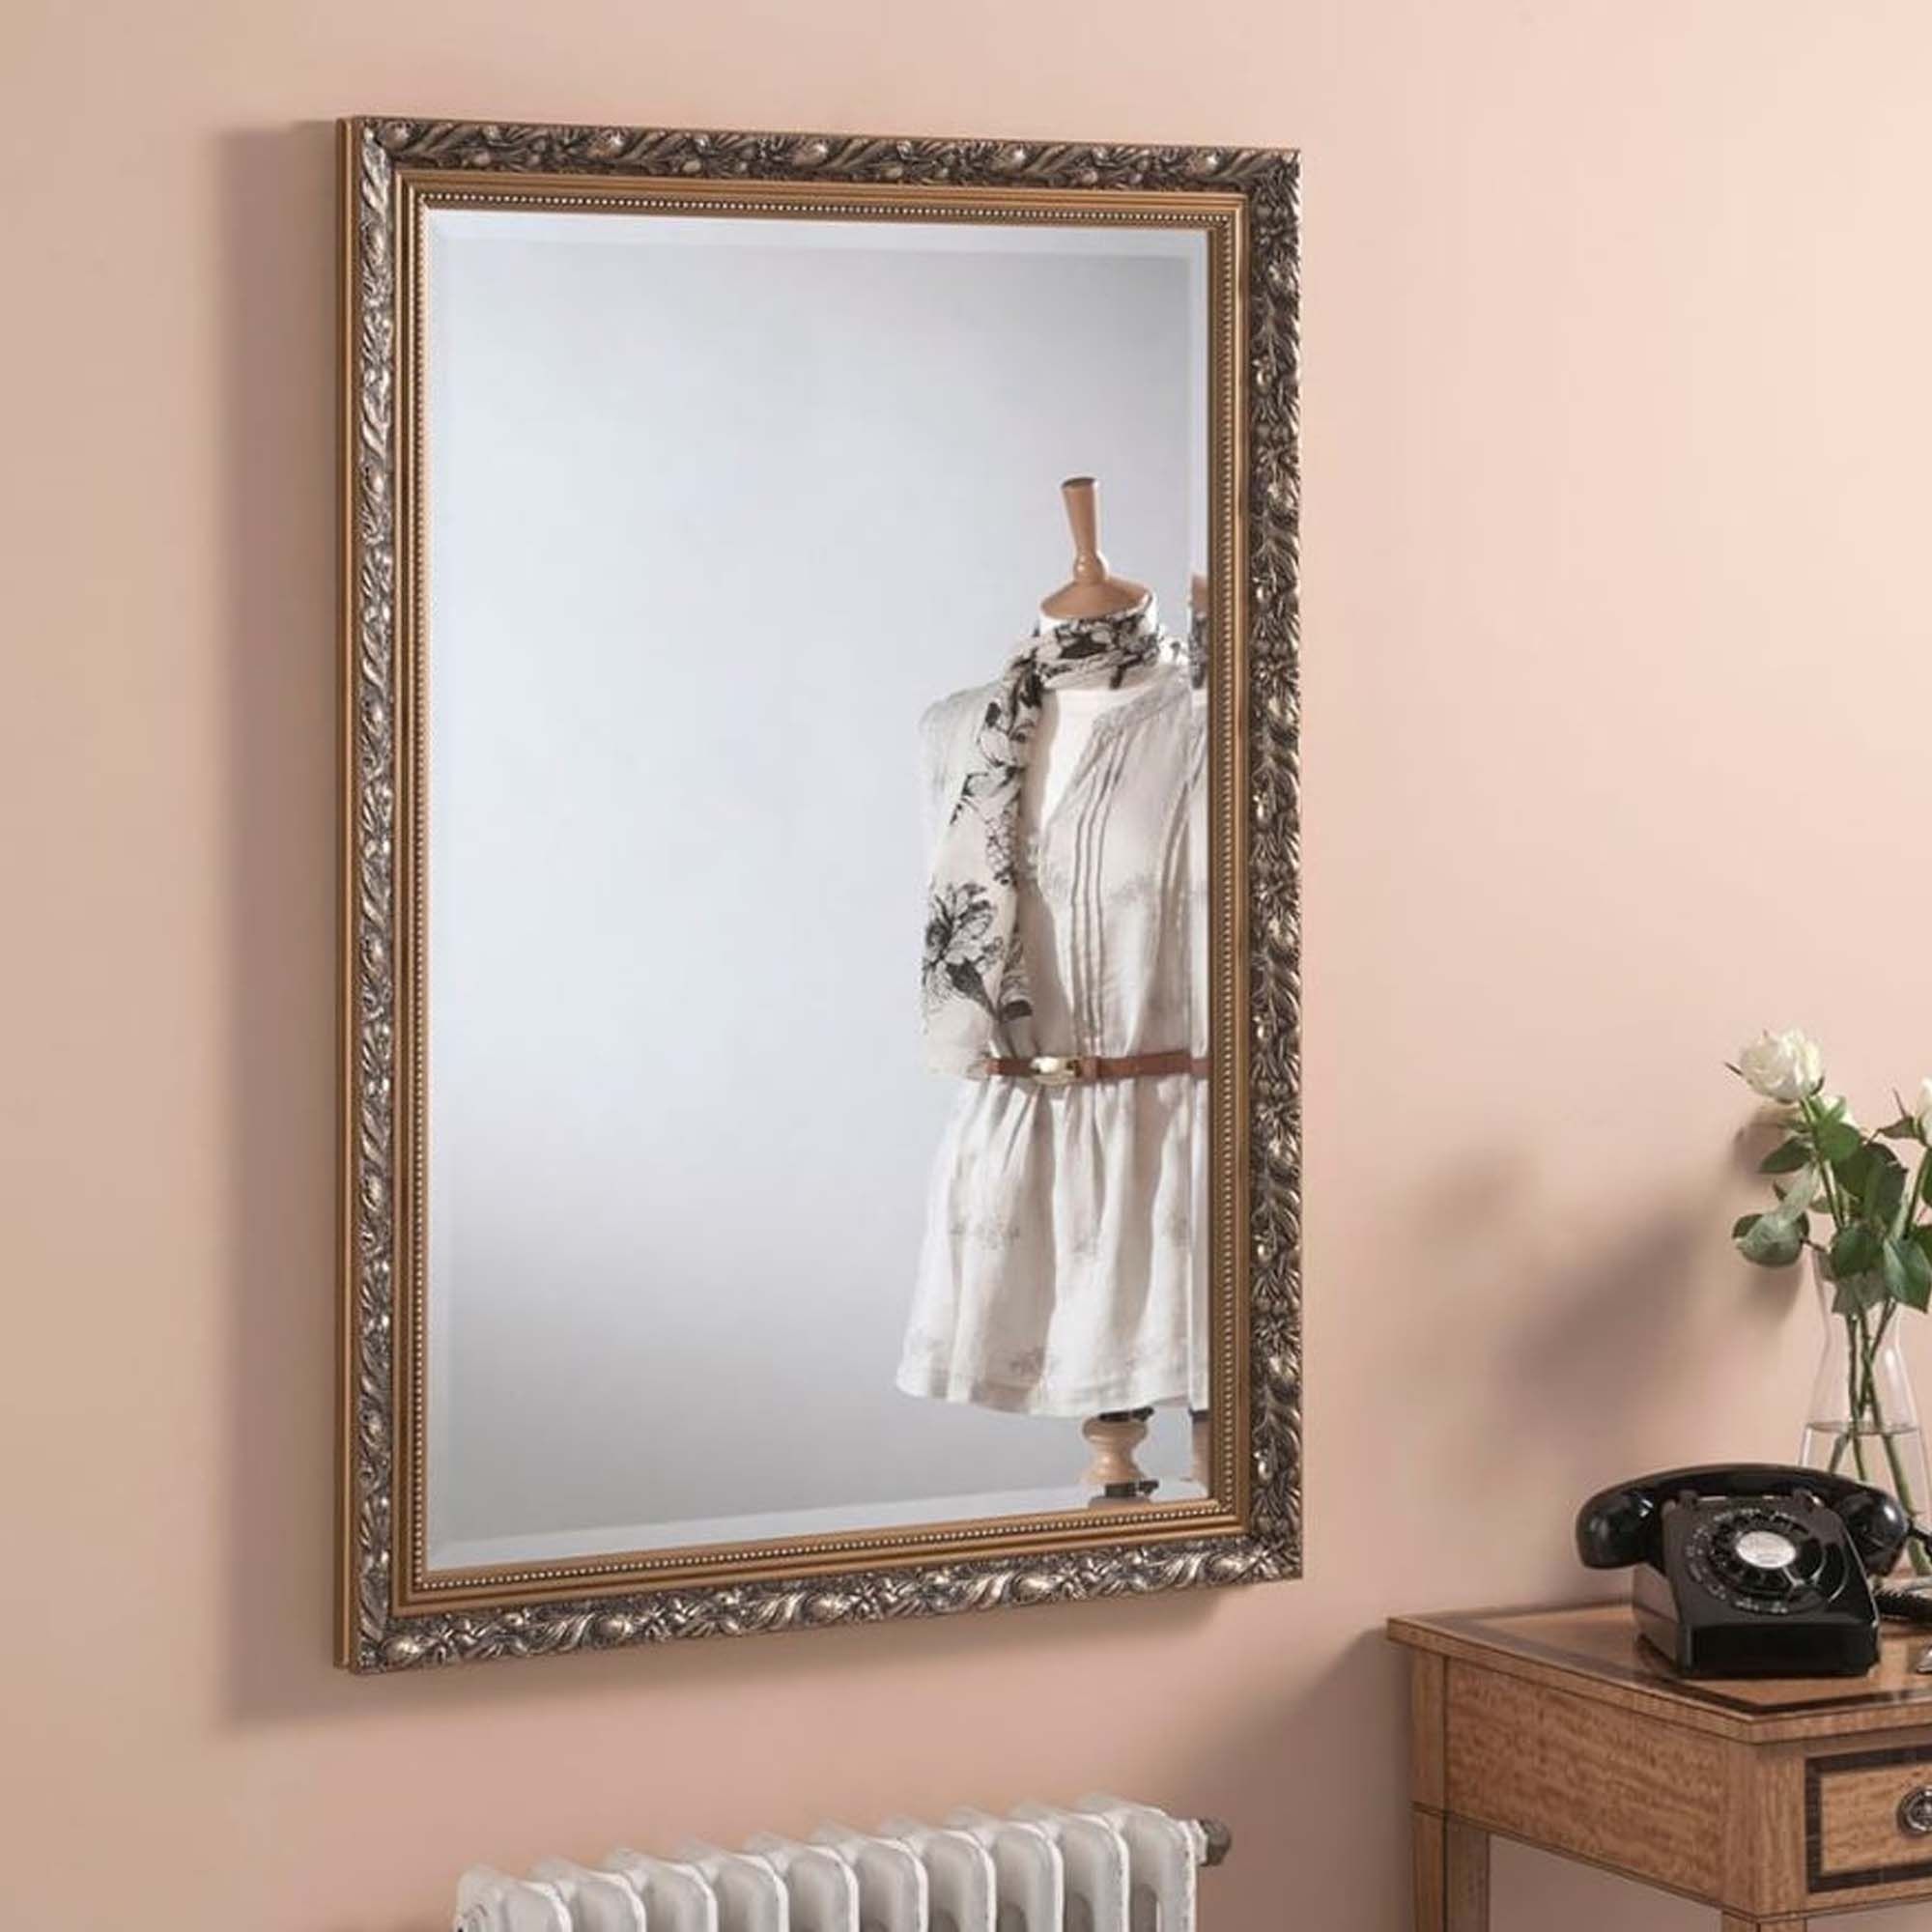 Dahlia Decorative Gold Rectangular Wall Mirror | Homesdirect365 With Tellier Accent Wall Mirrors (View 8 of 15)